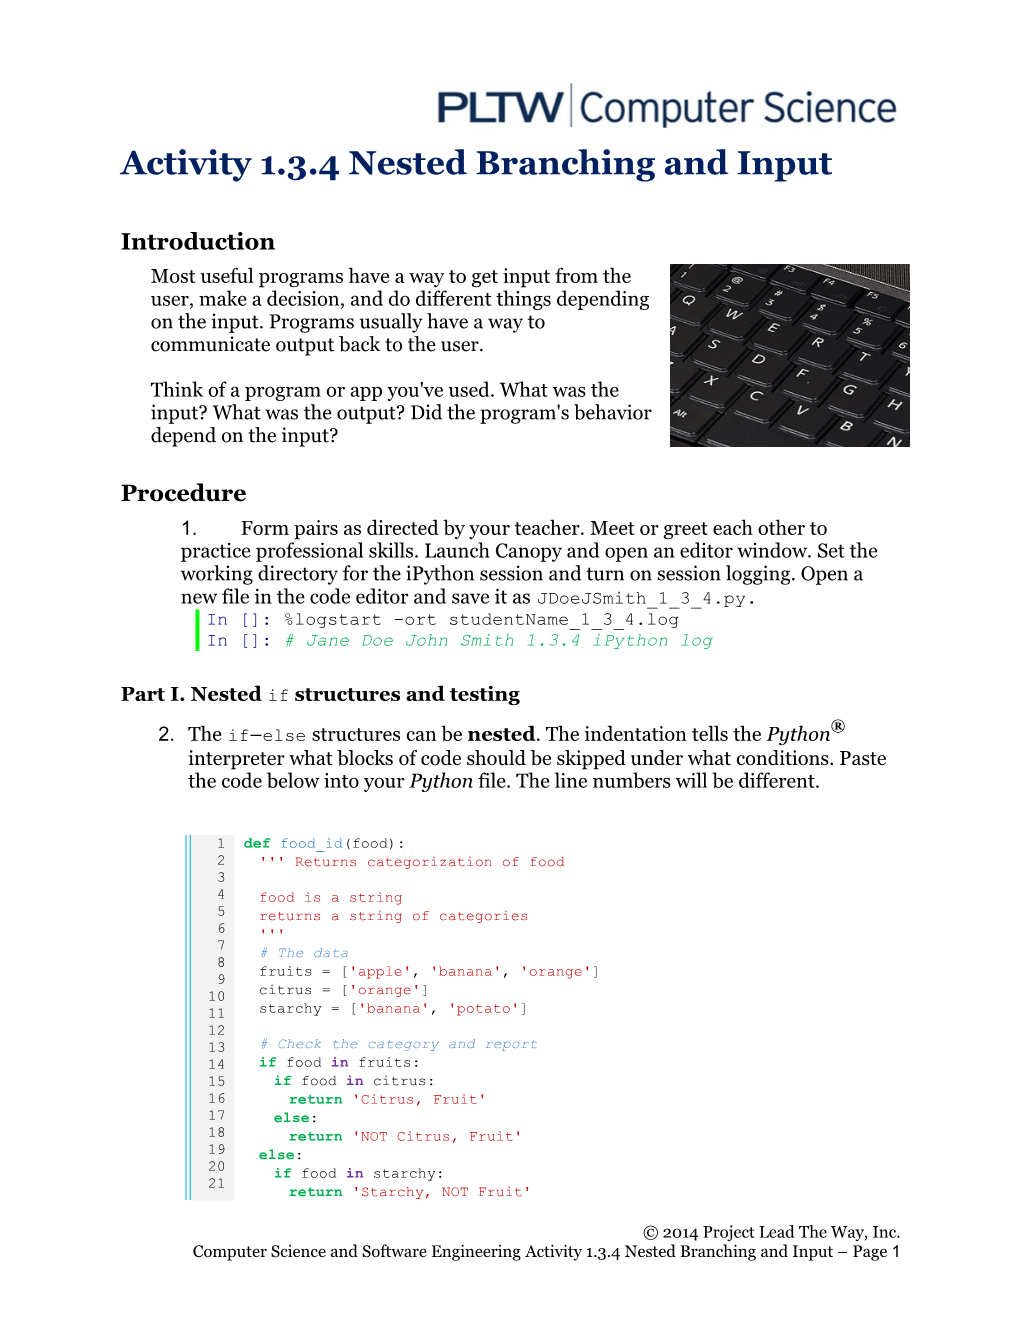 Activity 1.3.4 Nested Branching And Input